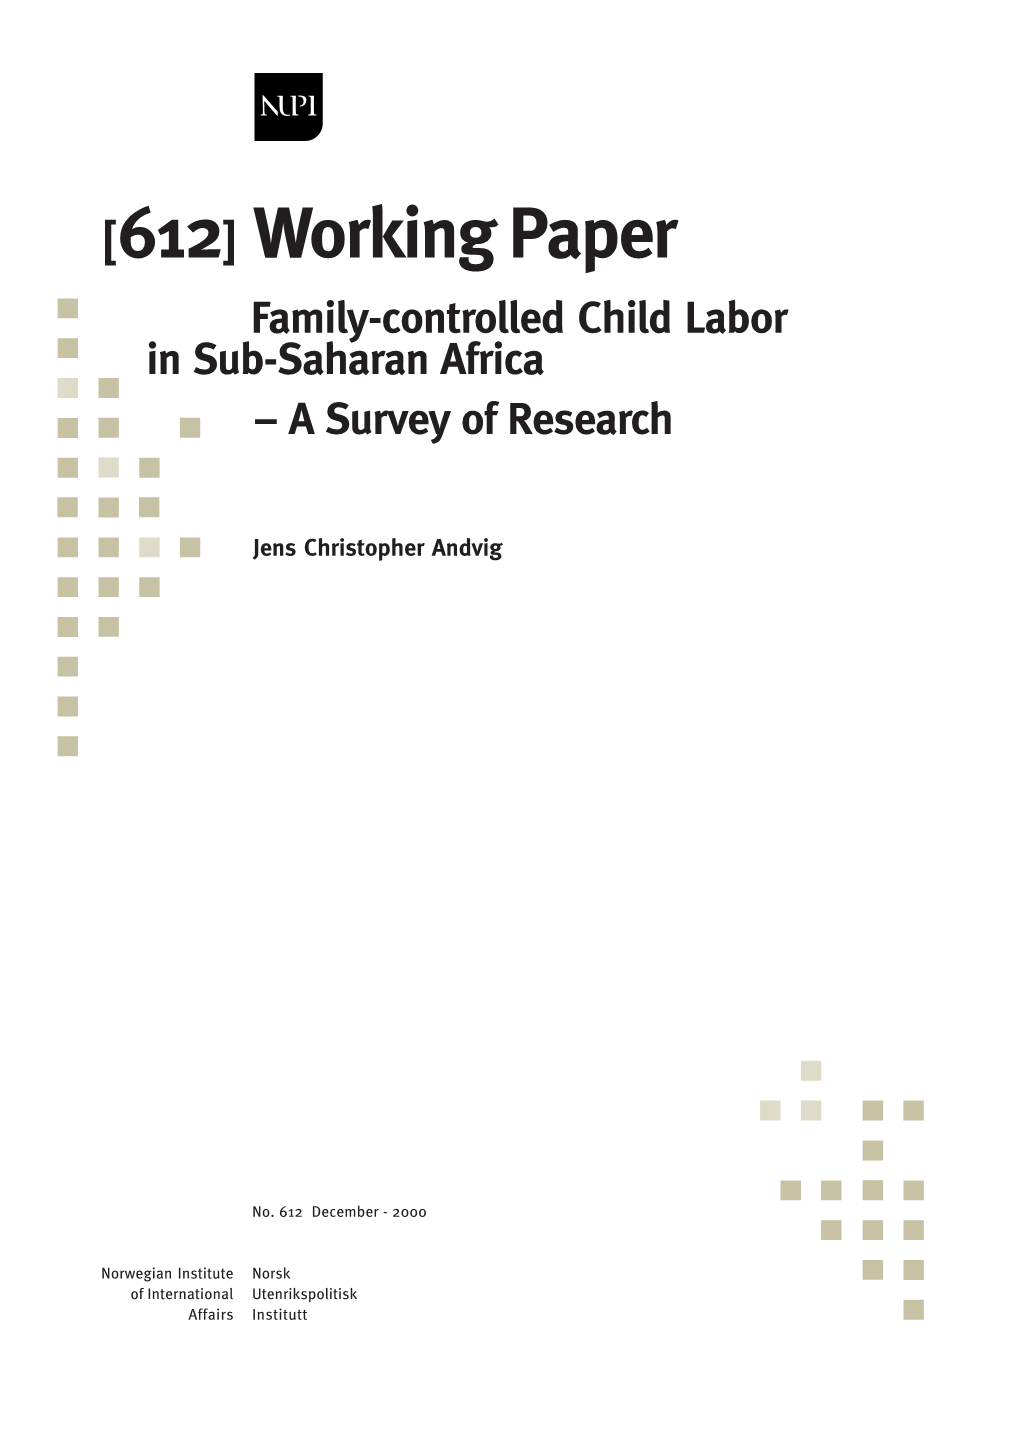 Family-Controlled Child Labor in Sub-Saharan Africa – a Survey of Research